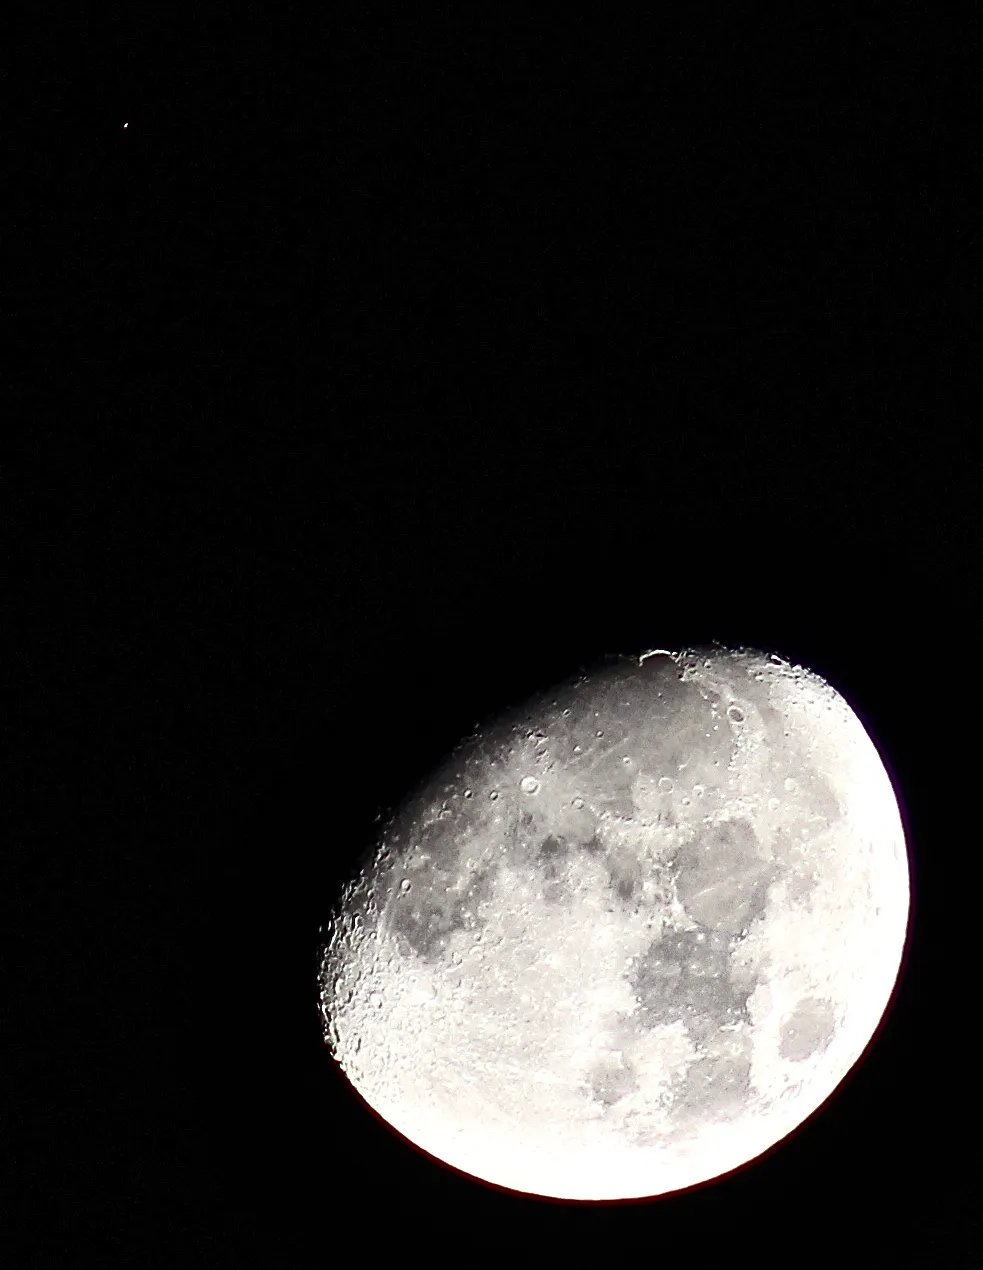 Waxing Gibbous Moon and Aldebaran by Sarah & Simon Fisher, Bromsgrove, Worcestershire, UK. Equipment: Canon 600D, 300mm lens